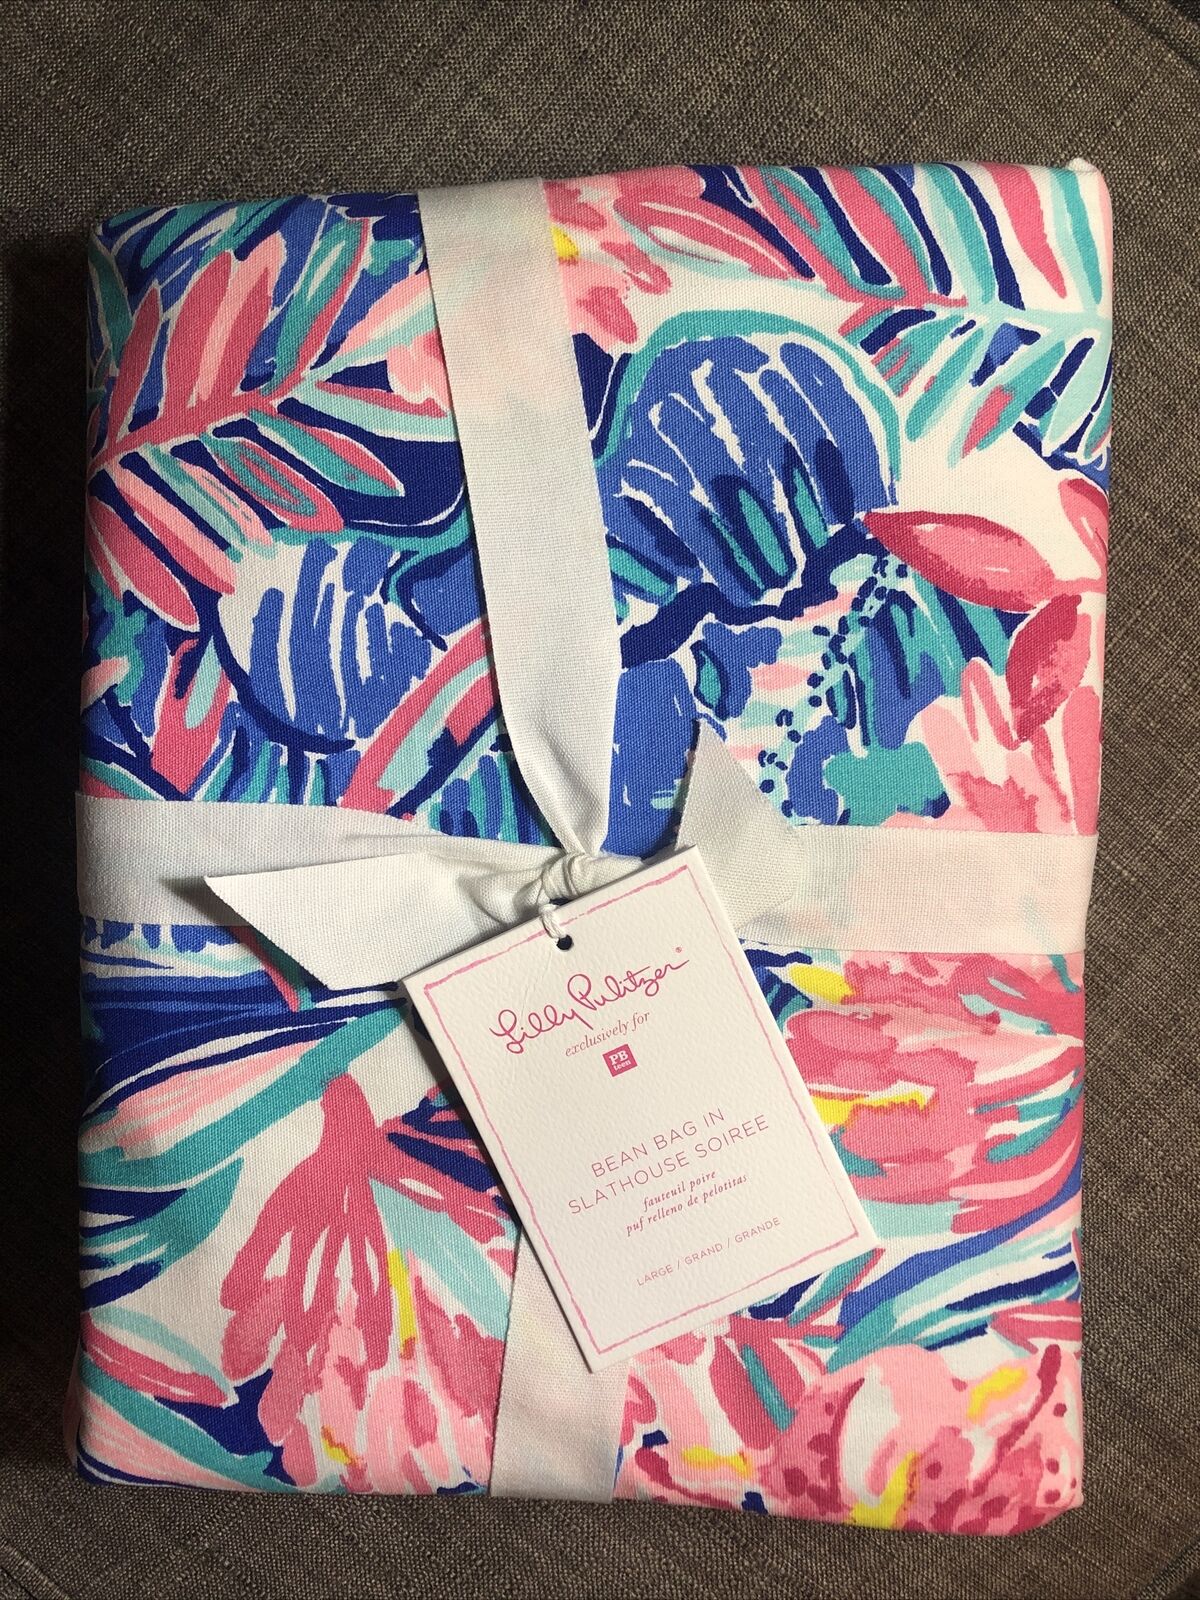 Pottery Barn Teen Lilly Pulitzer In Slathouse Soiree Bean Bag Slipcover Large